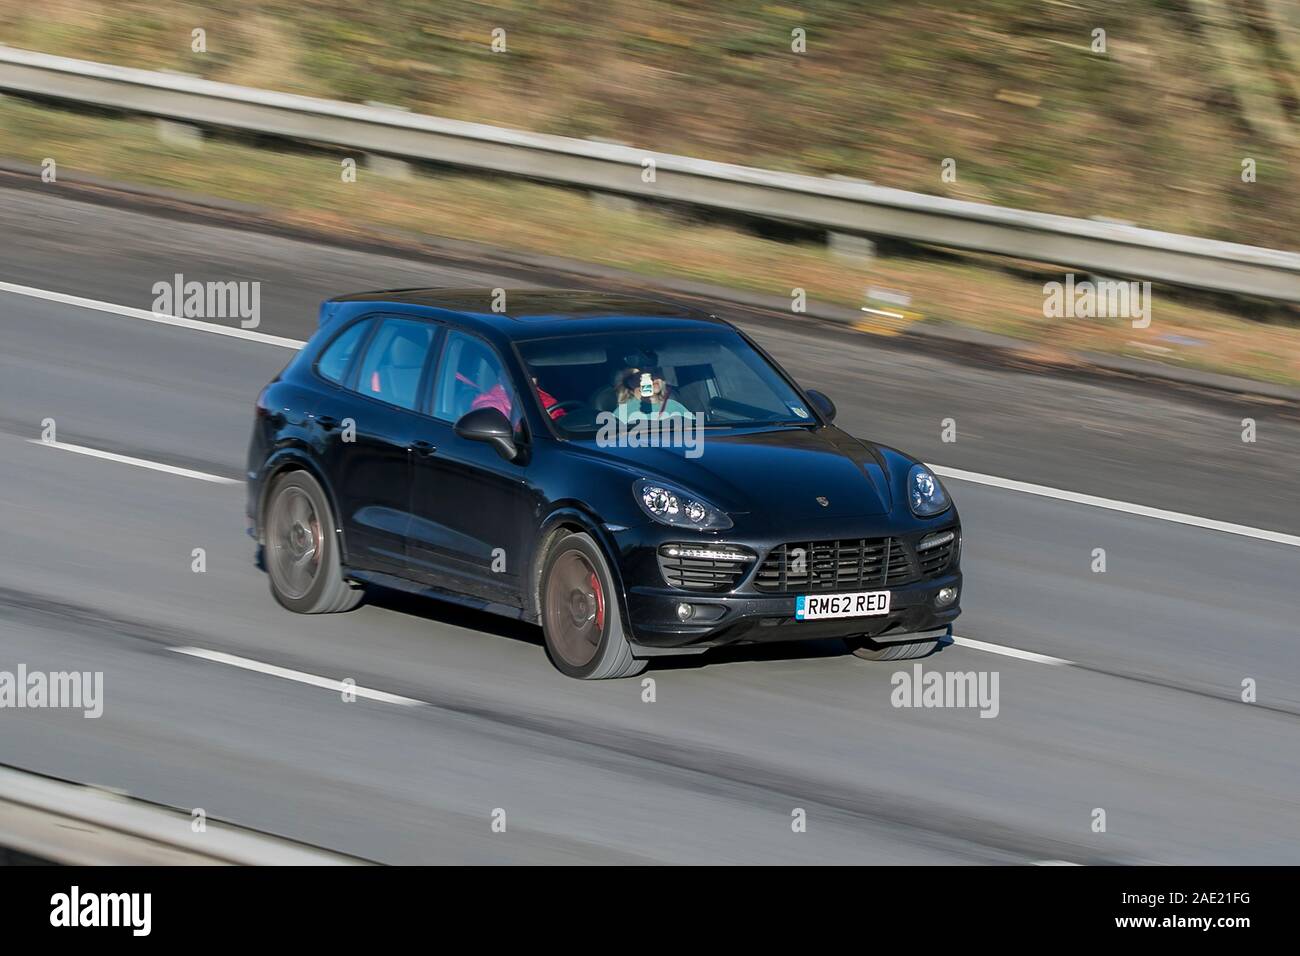 Blurred moving car PORSCHE CAYENNE traveling at speed on the M61 motorway Slow camera shutter speed vehicle movement Stock Photo